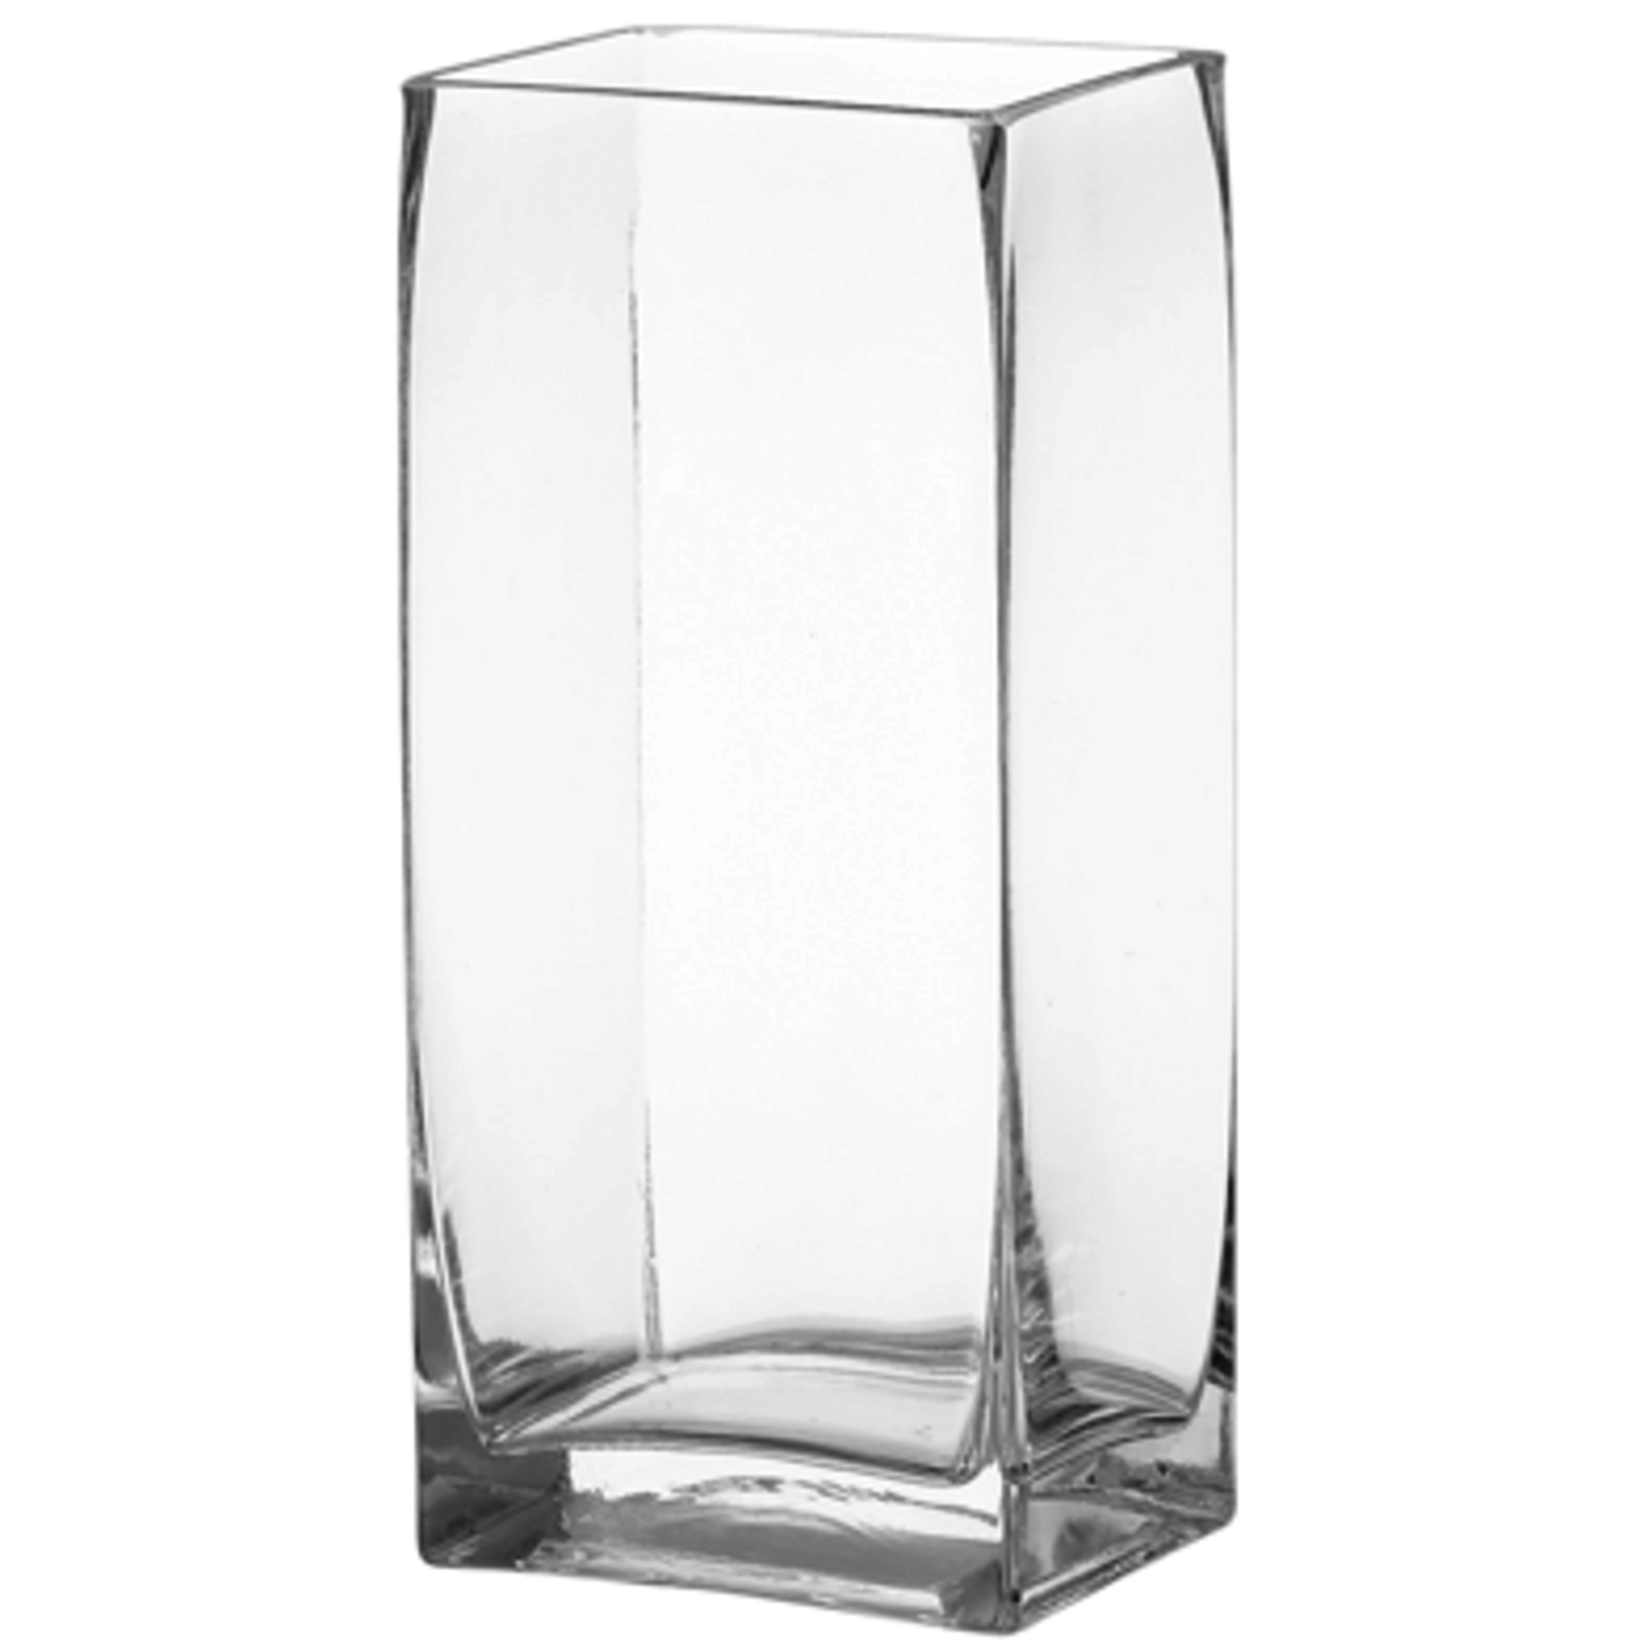 8"H X 3" X 4" CLEAR GLASS RECTANGLE VASE